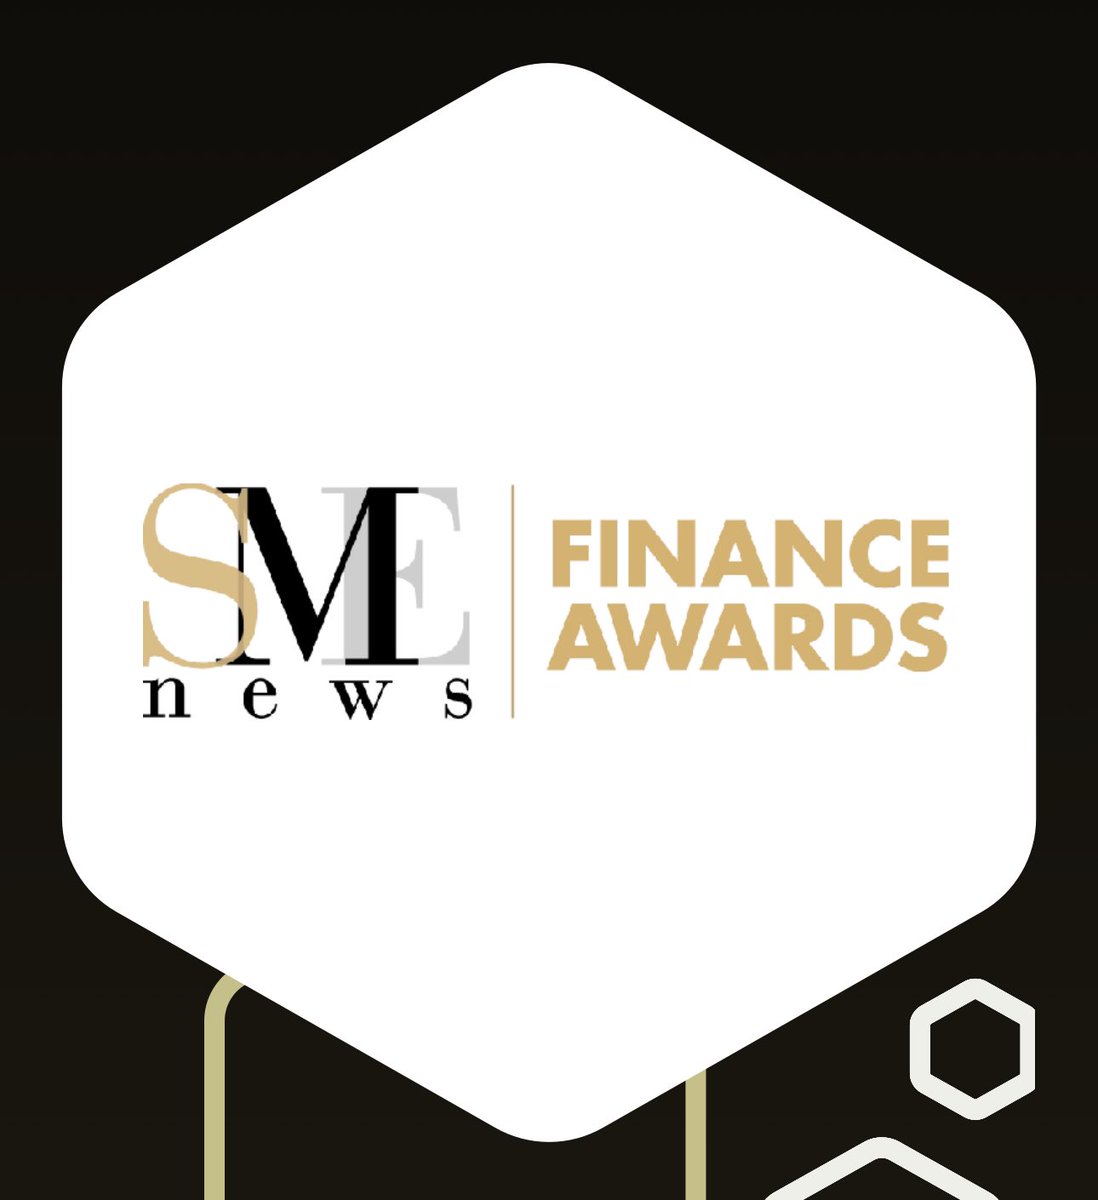 Stone Mountain Capital LTD is thrilled to be awarded “Best Alternative Investments Placement Agents - UK” in the SME News’ UK Finance Awards 2023🏆 @stonemountainuk @stonemountaincp @stonemountainch @stonemountainae @stonemountaincv @SME__News #hedgefunds stonemountain-capital.net/news/stone-mou…